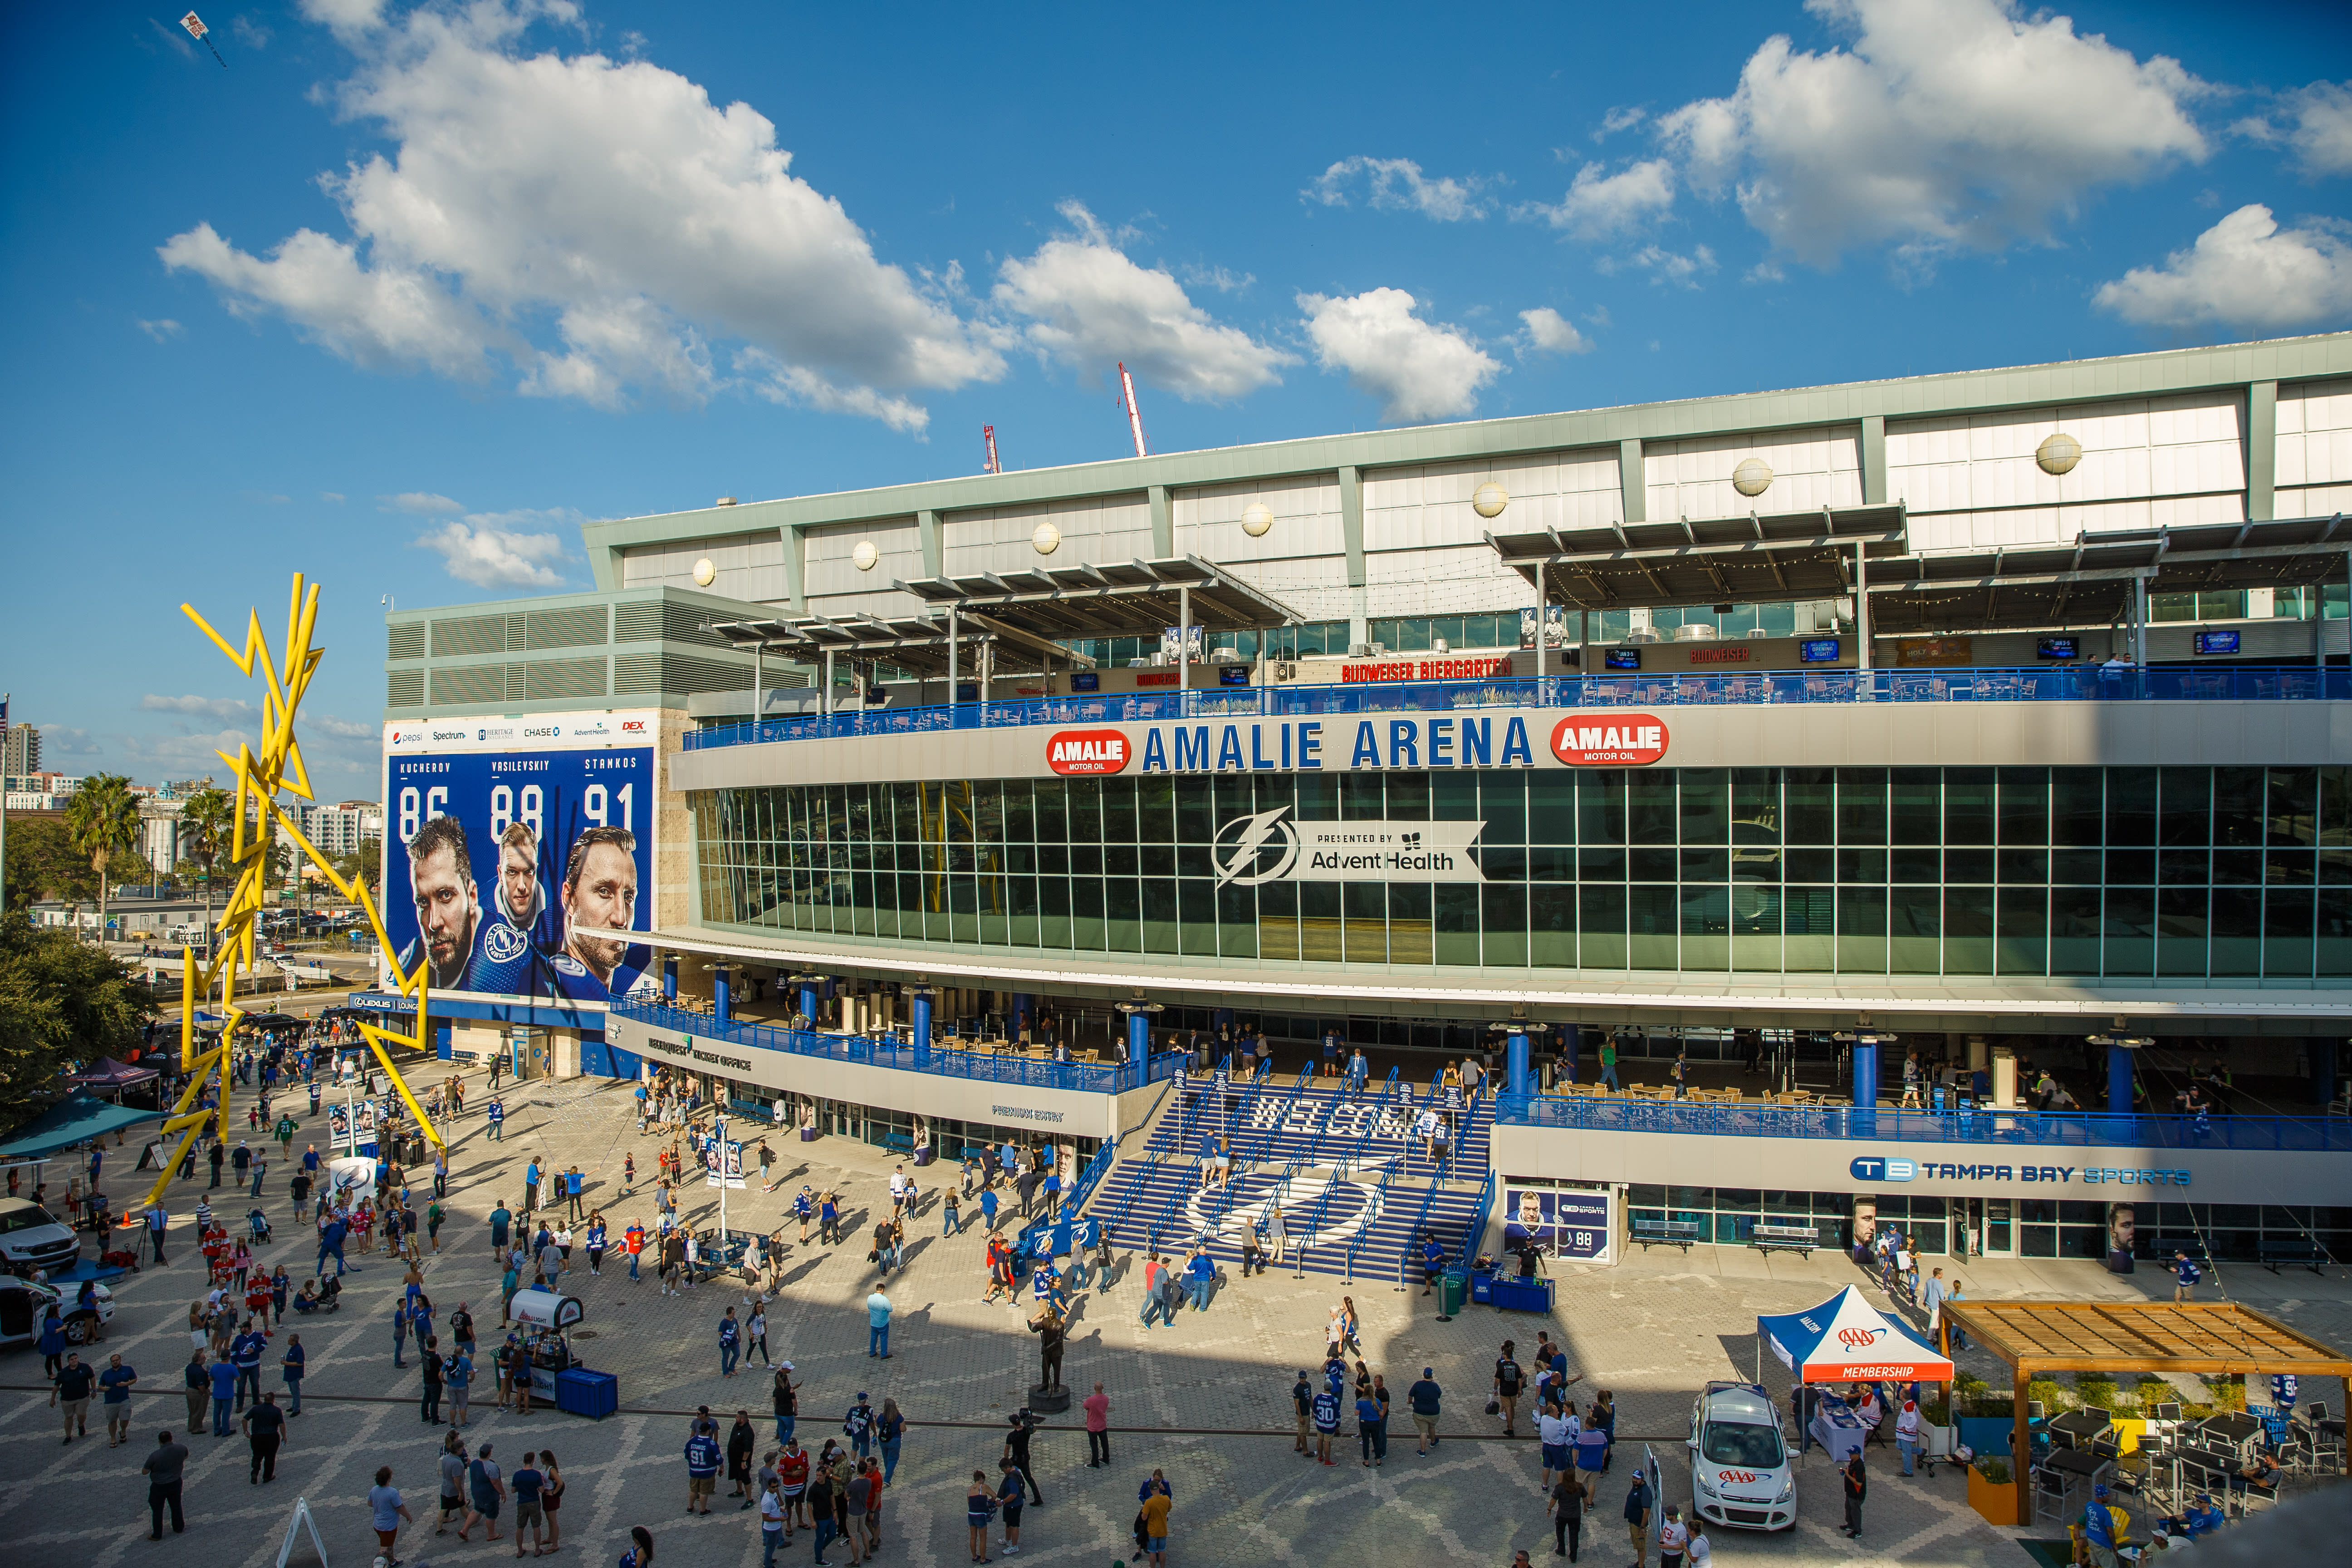 7 Great Places To Eat Near Amalie Arena